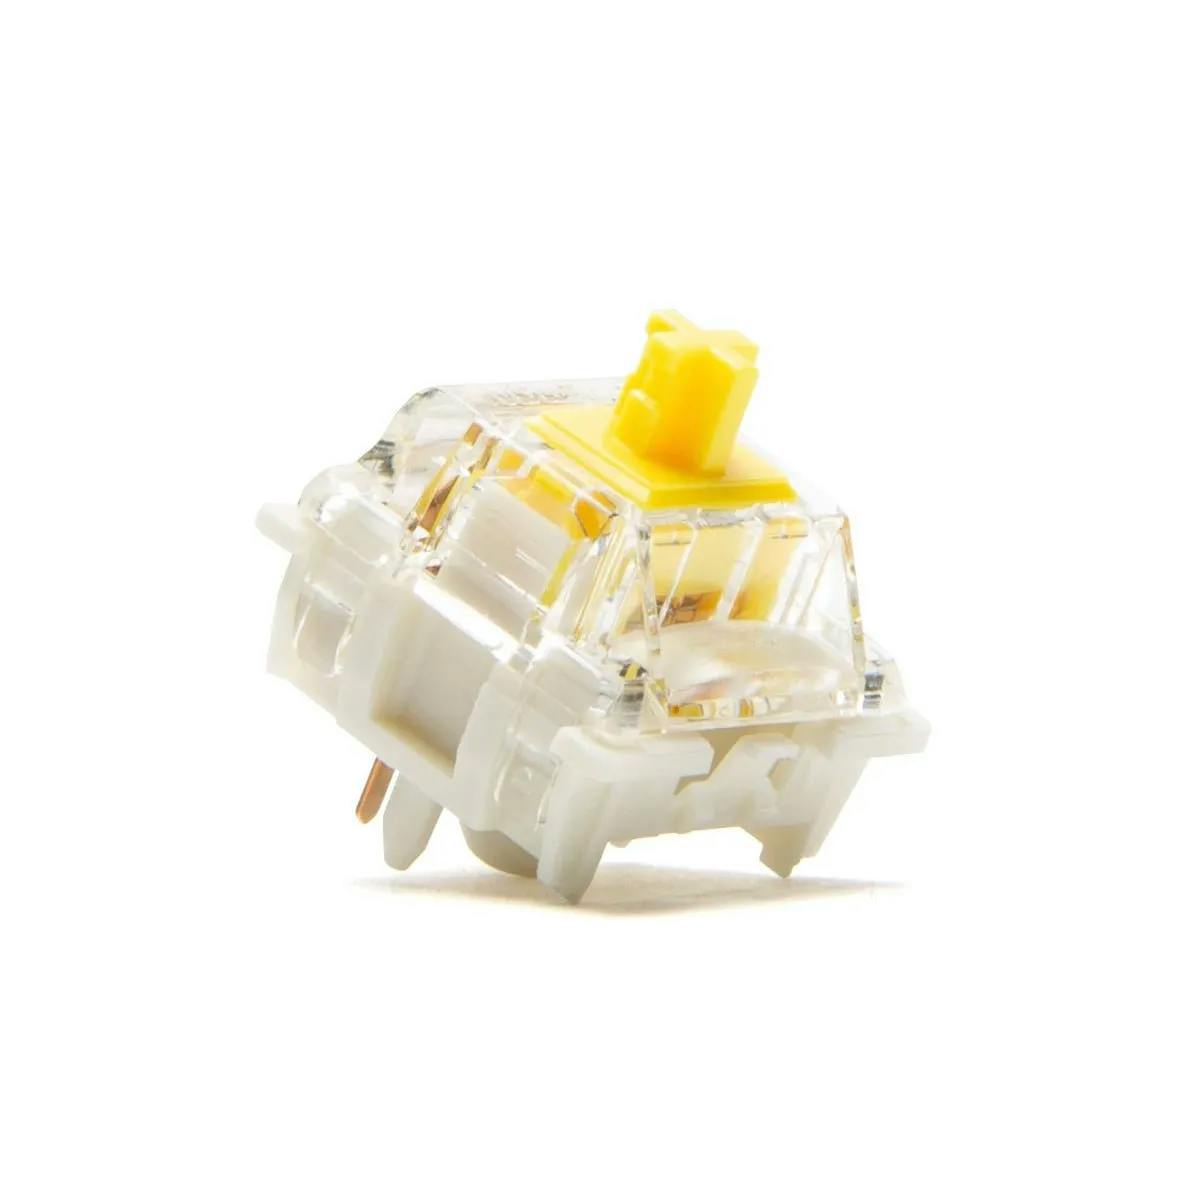 Image for Gateron KS-9 3.0 Yellow Linear Switches